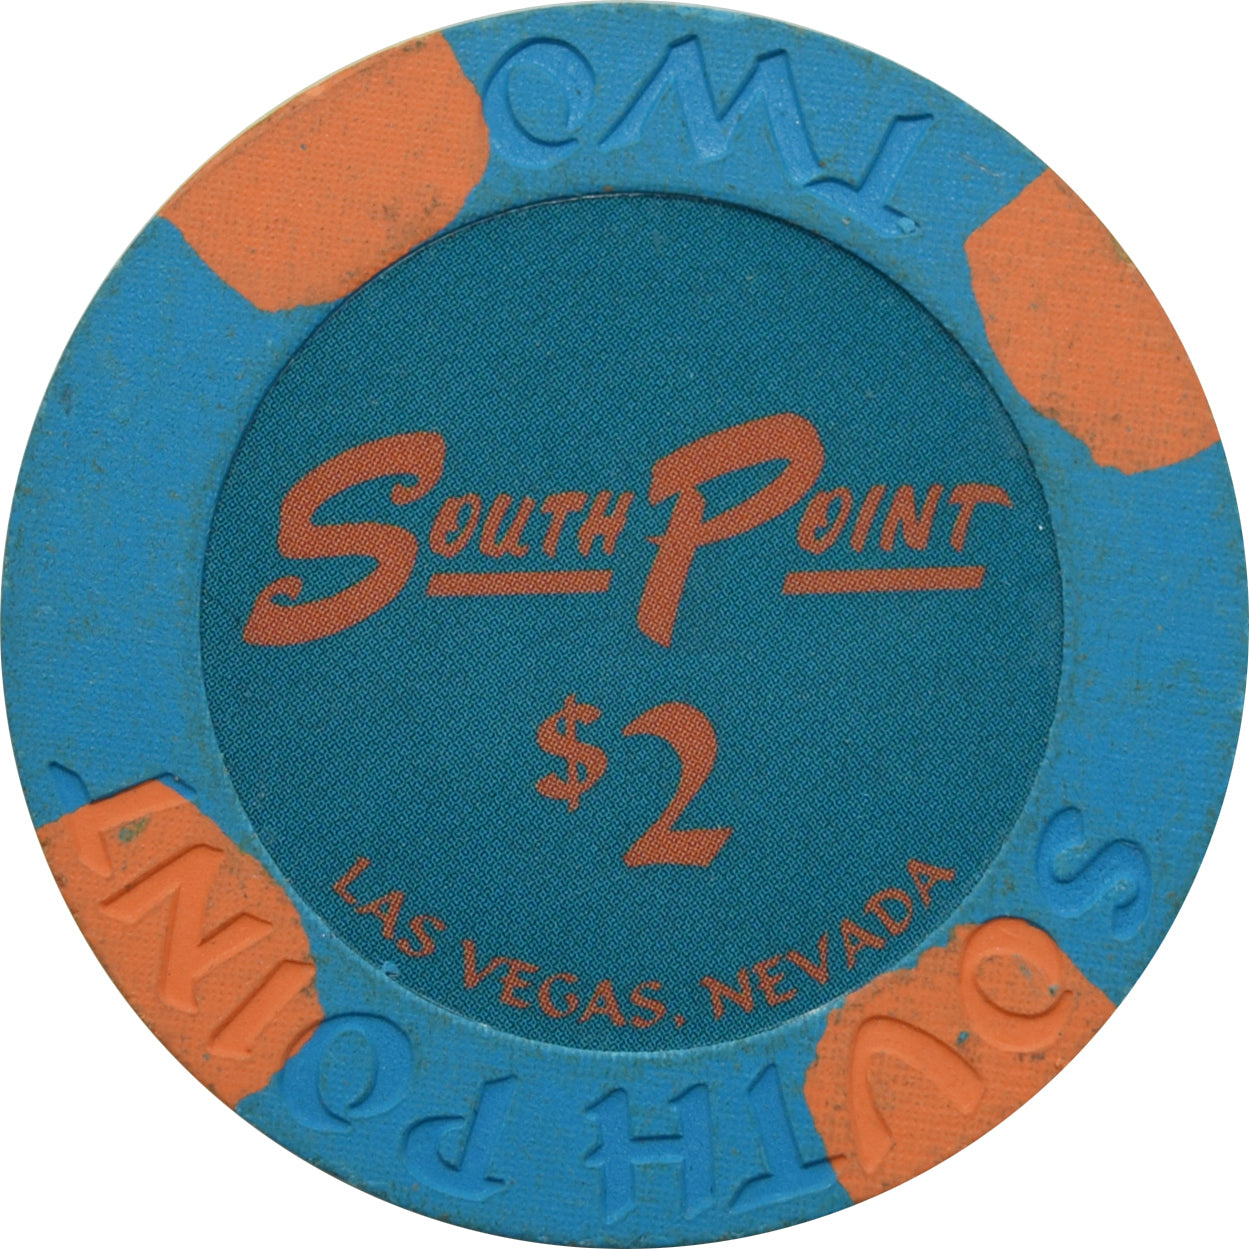 south point casino change reservation